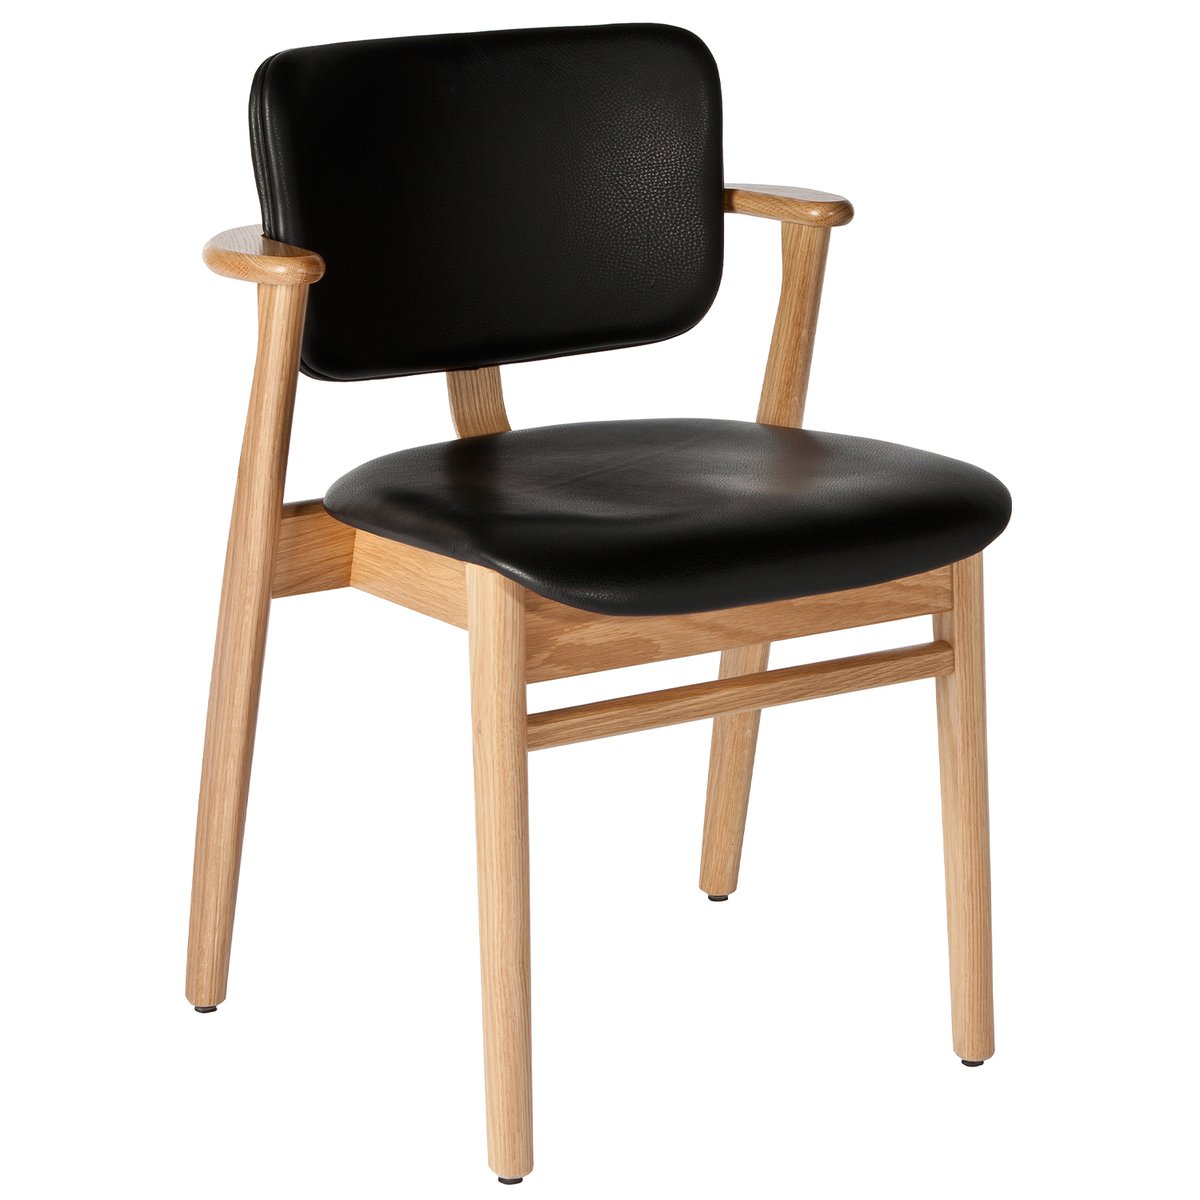 Eco-friendly leather chair with handle - Bangkok - Cm 43 x 39 x 91 h